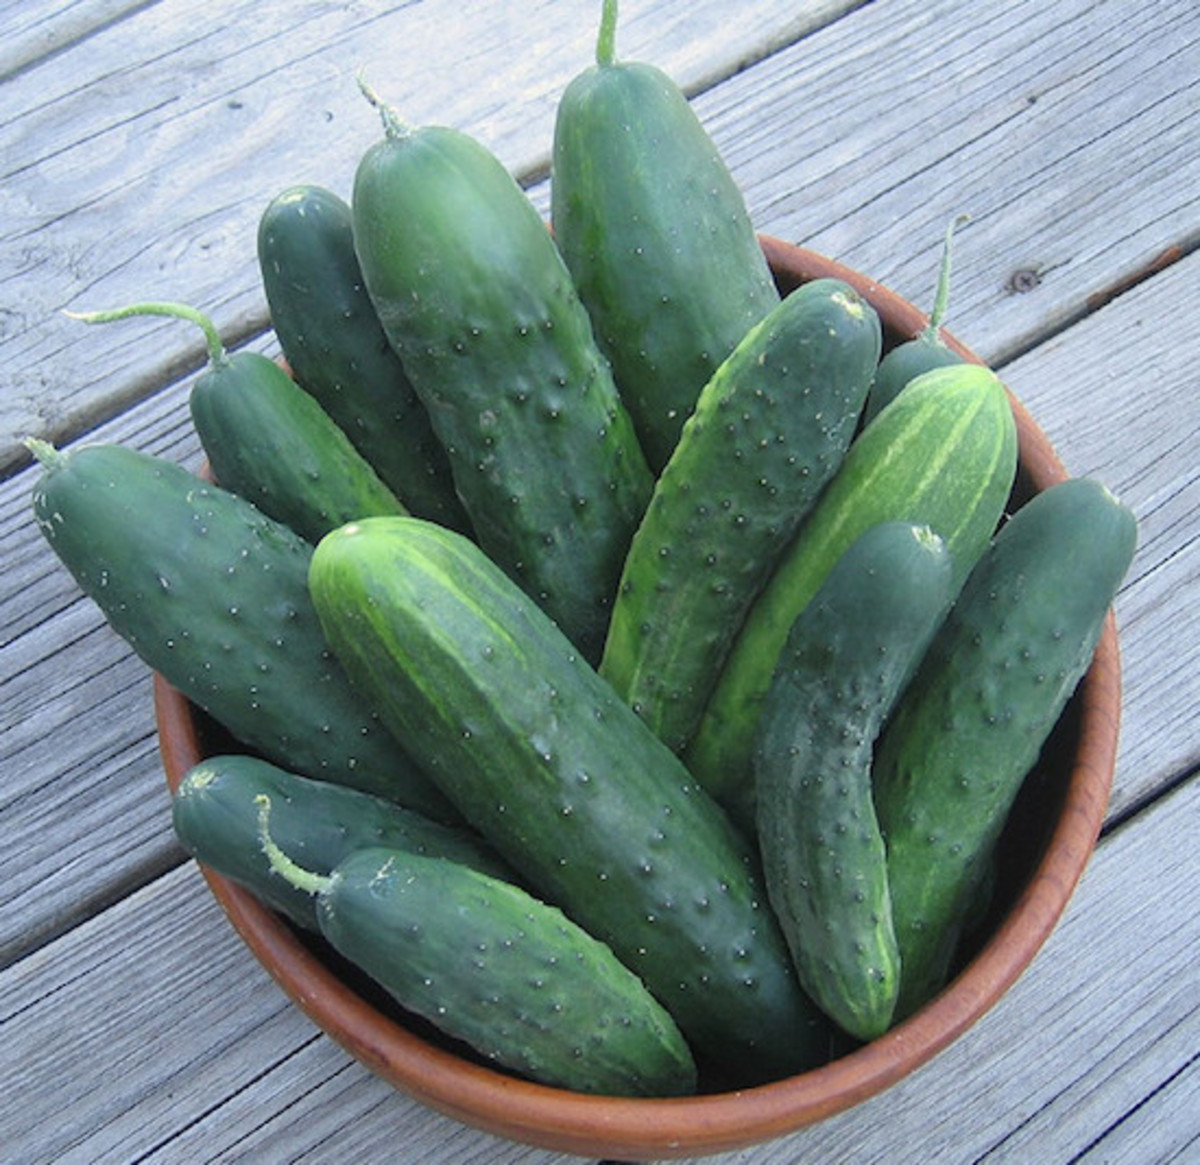 Cool Cukes: How to Grow Cucumbers for Summer Recipes